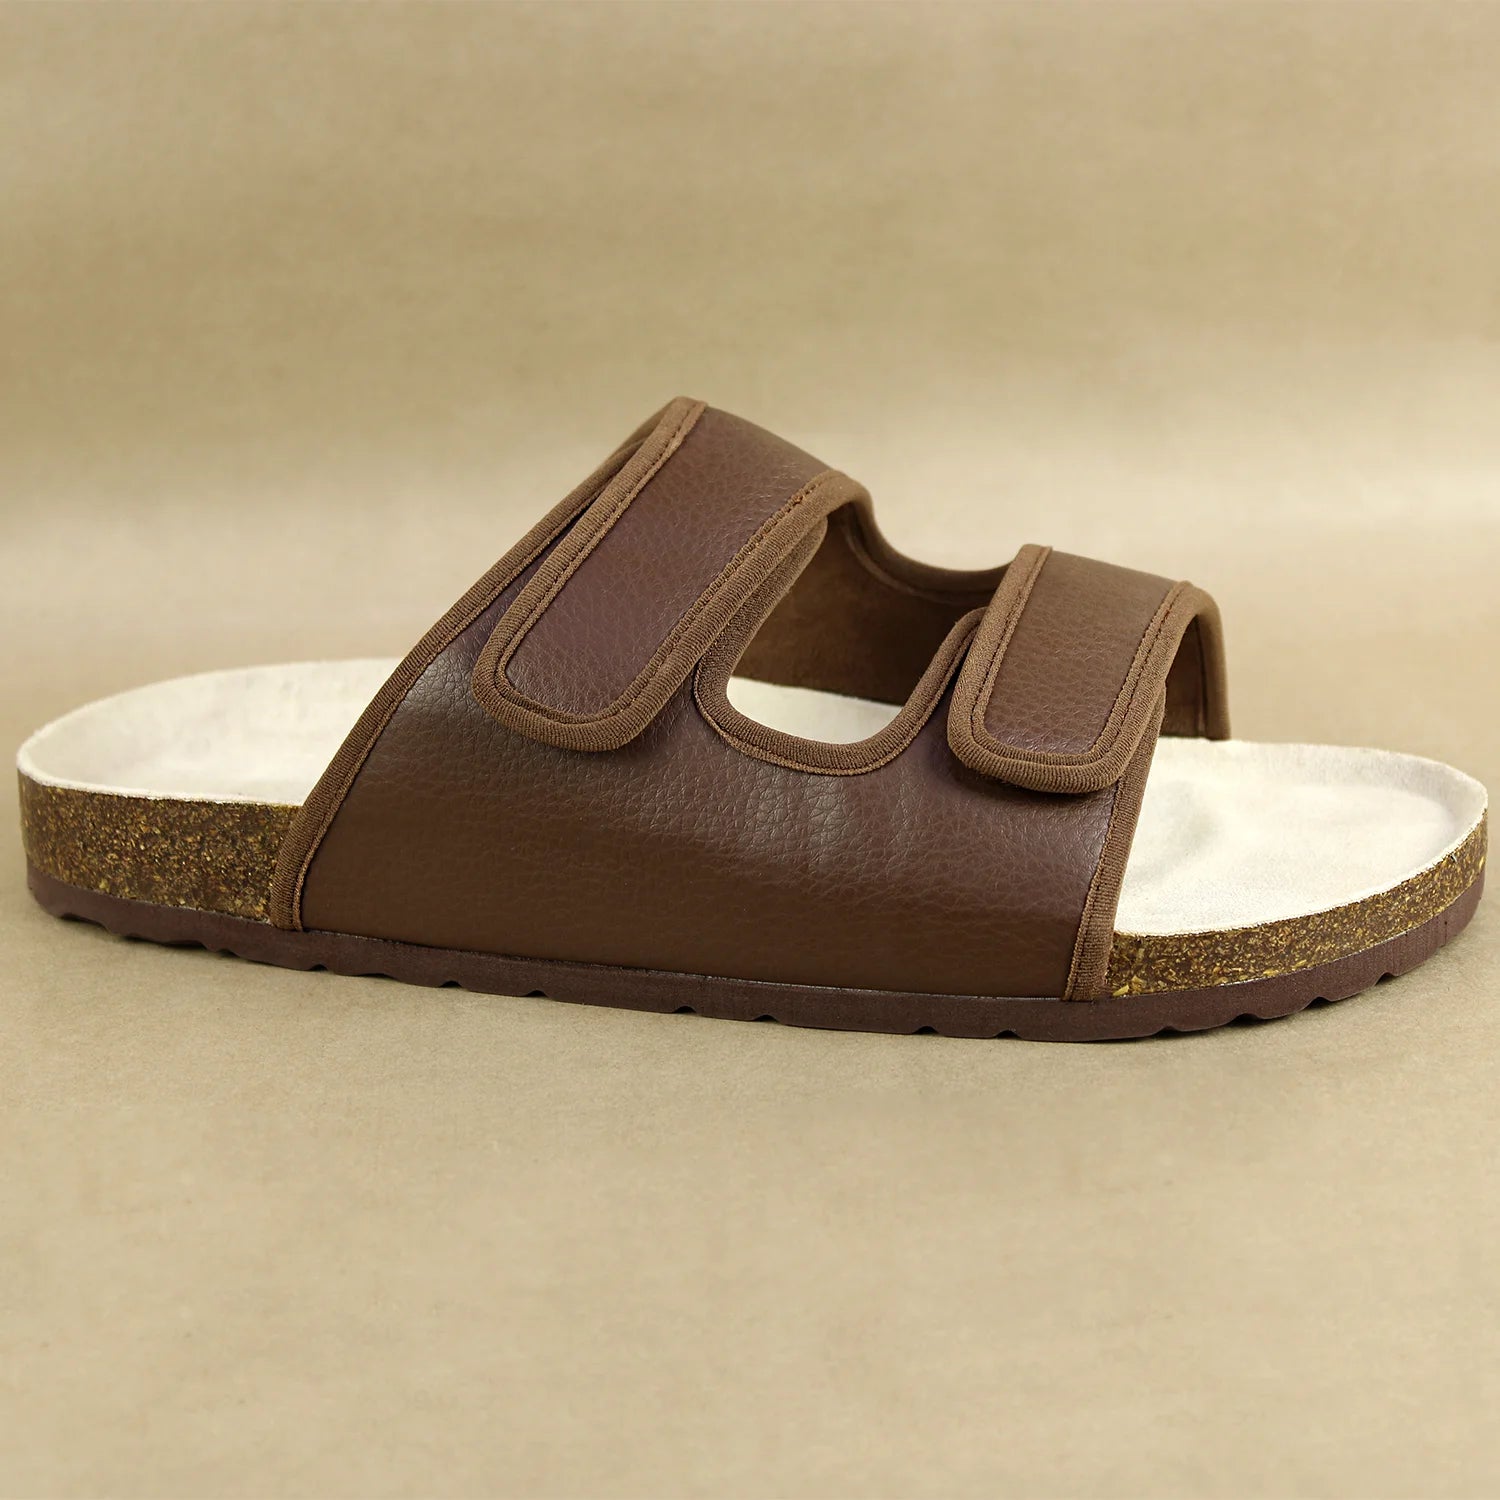 Men's Cork Sandals in Brown: Comfortable and Adjustable Footwear for Any Occasion